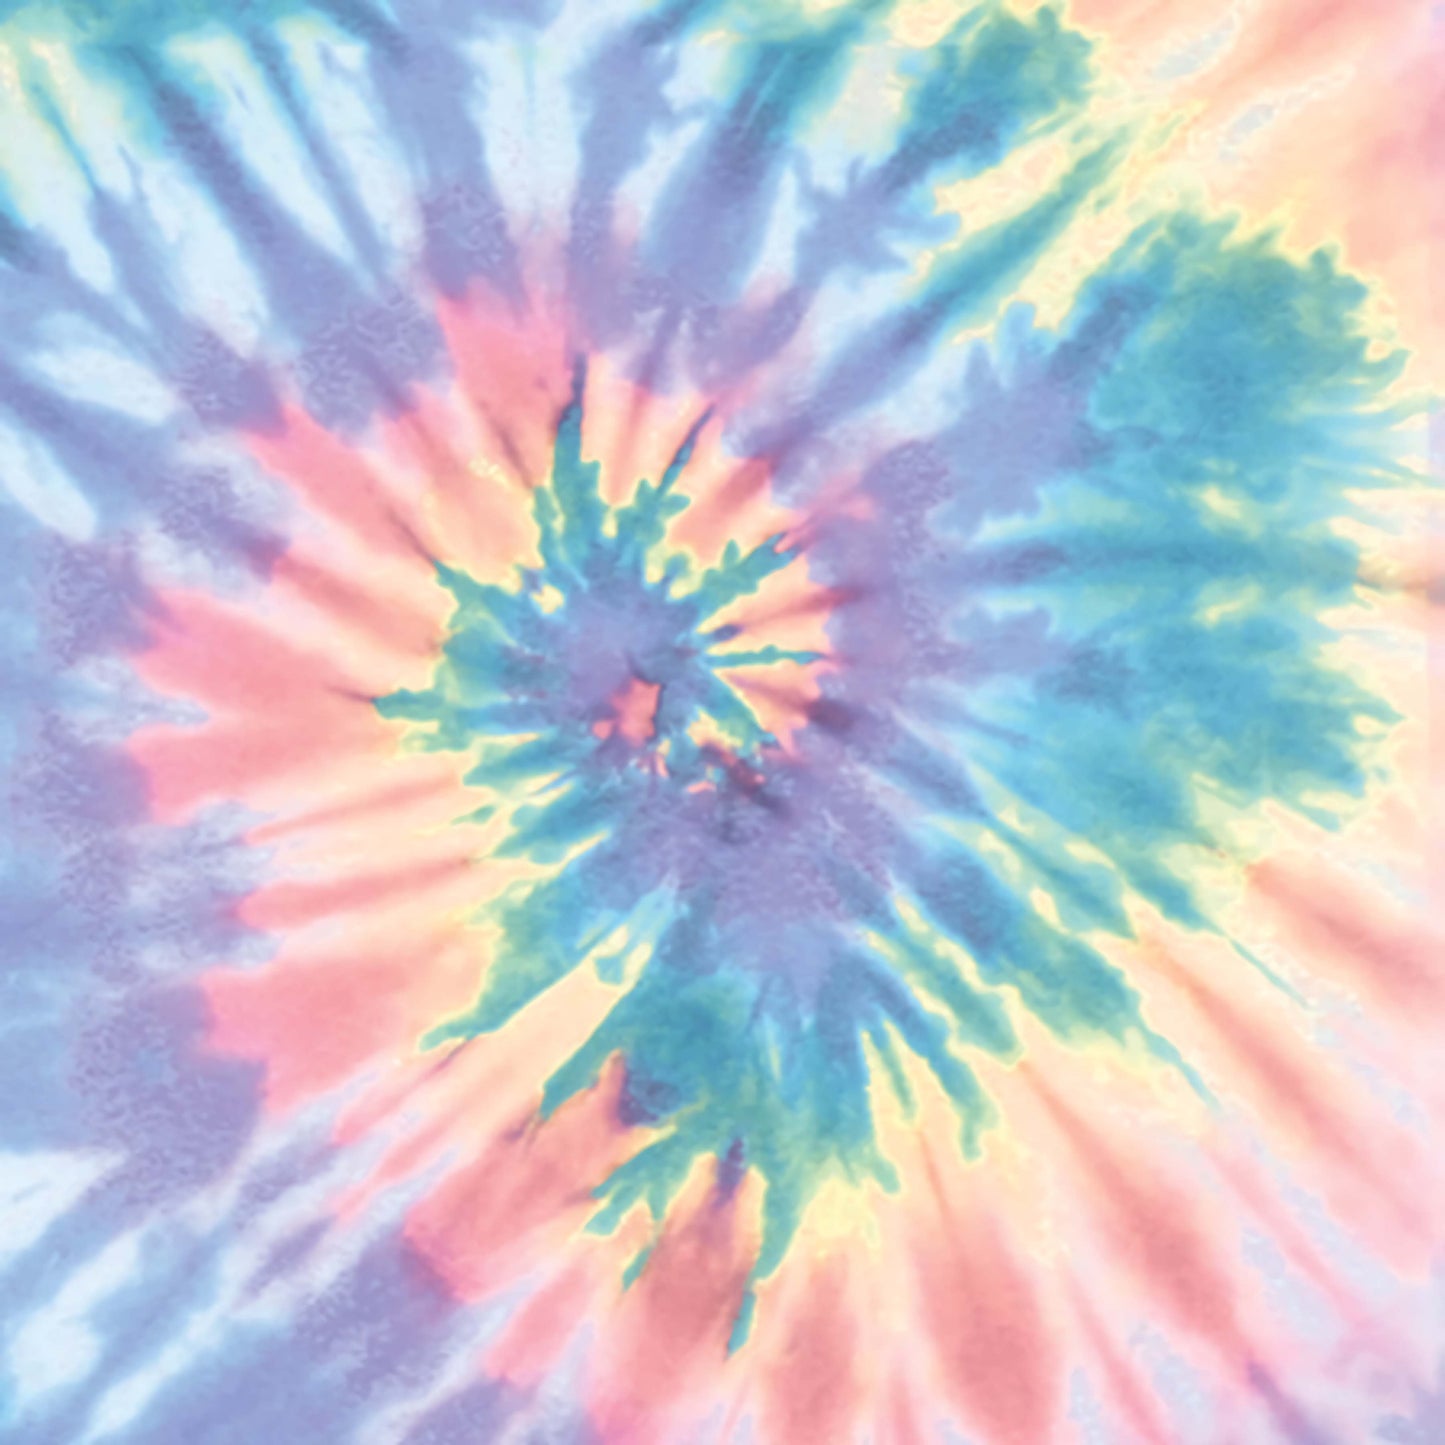 Very Colorful Tie Dye 006